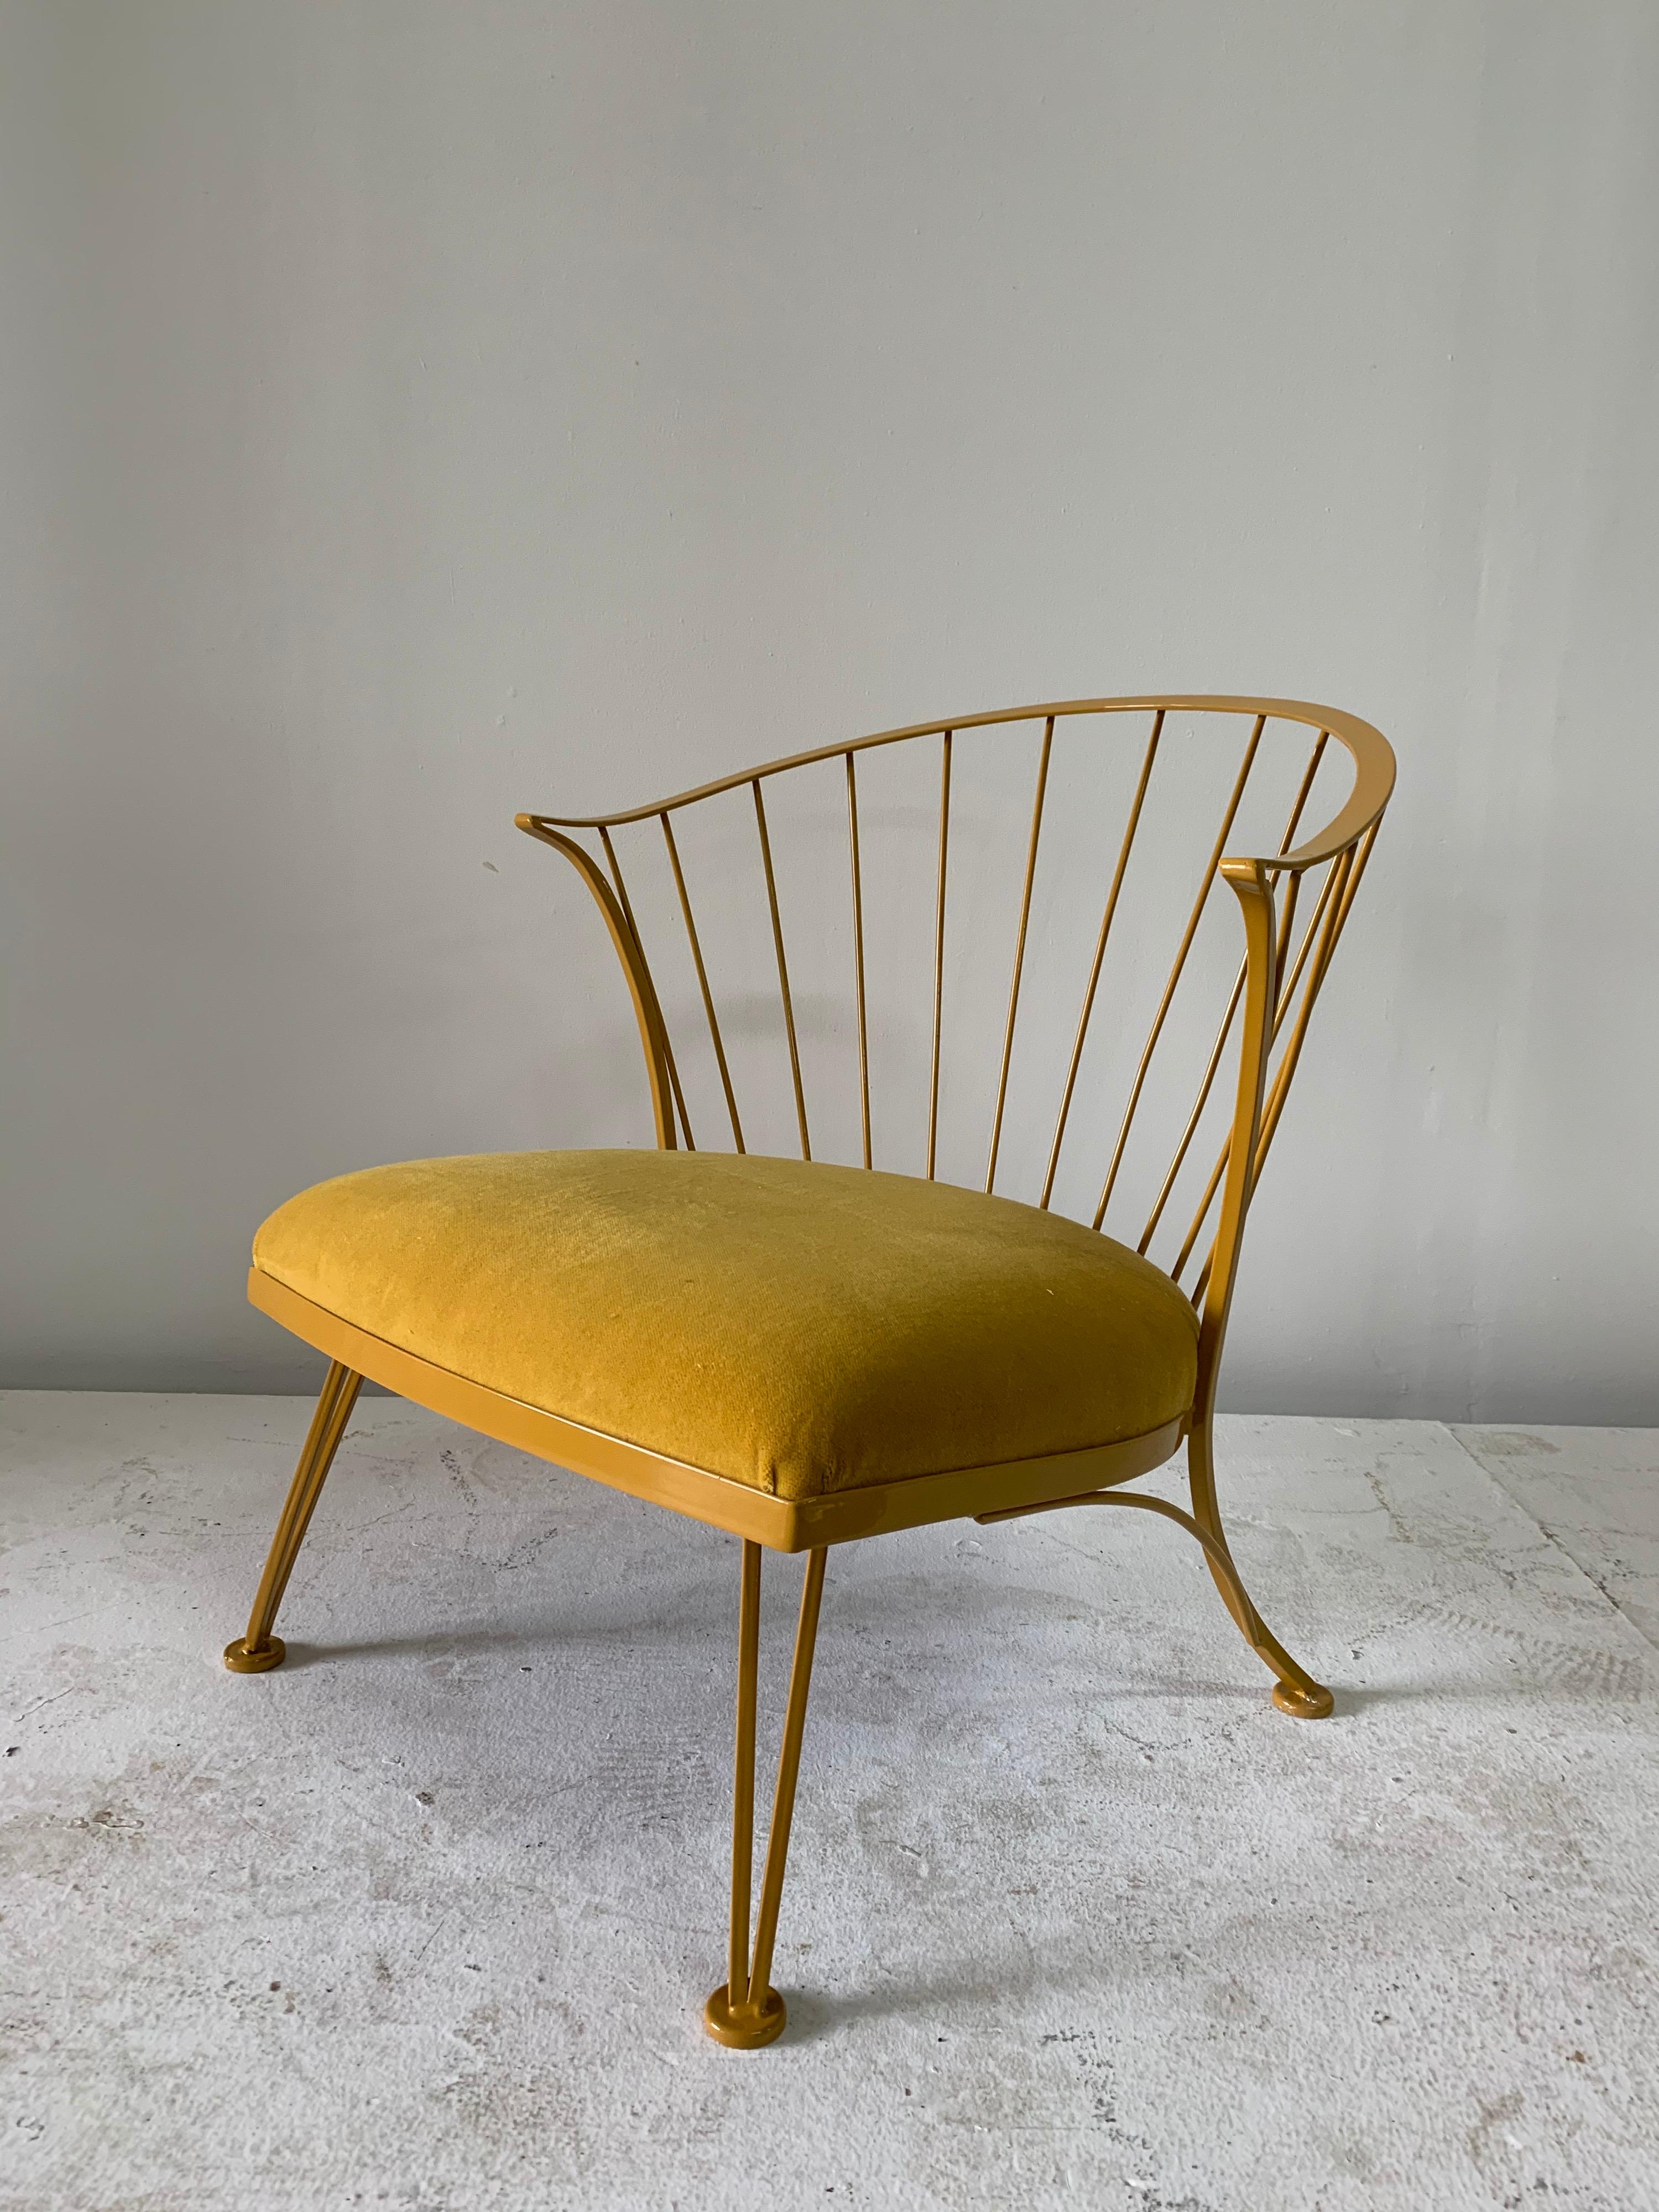 Rare vintage Russell Woodard custom powder-coated single armchair. This newly powder-coated iron Woodard chair in “Cat yellow” and finely upholstered in matching cotton/mohair fabric. This has been upholstered for interior use. Pinecrest pattern.